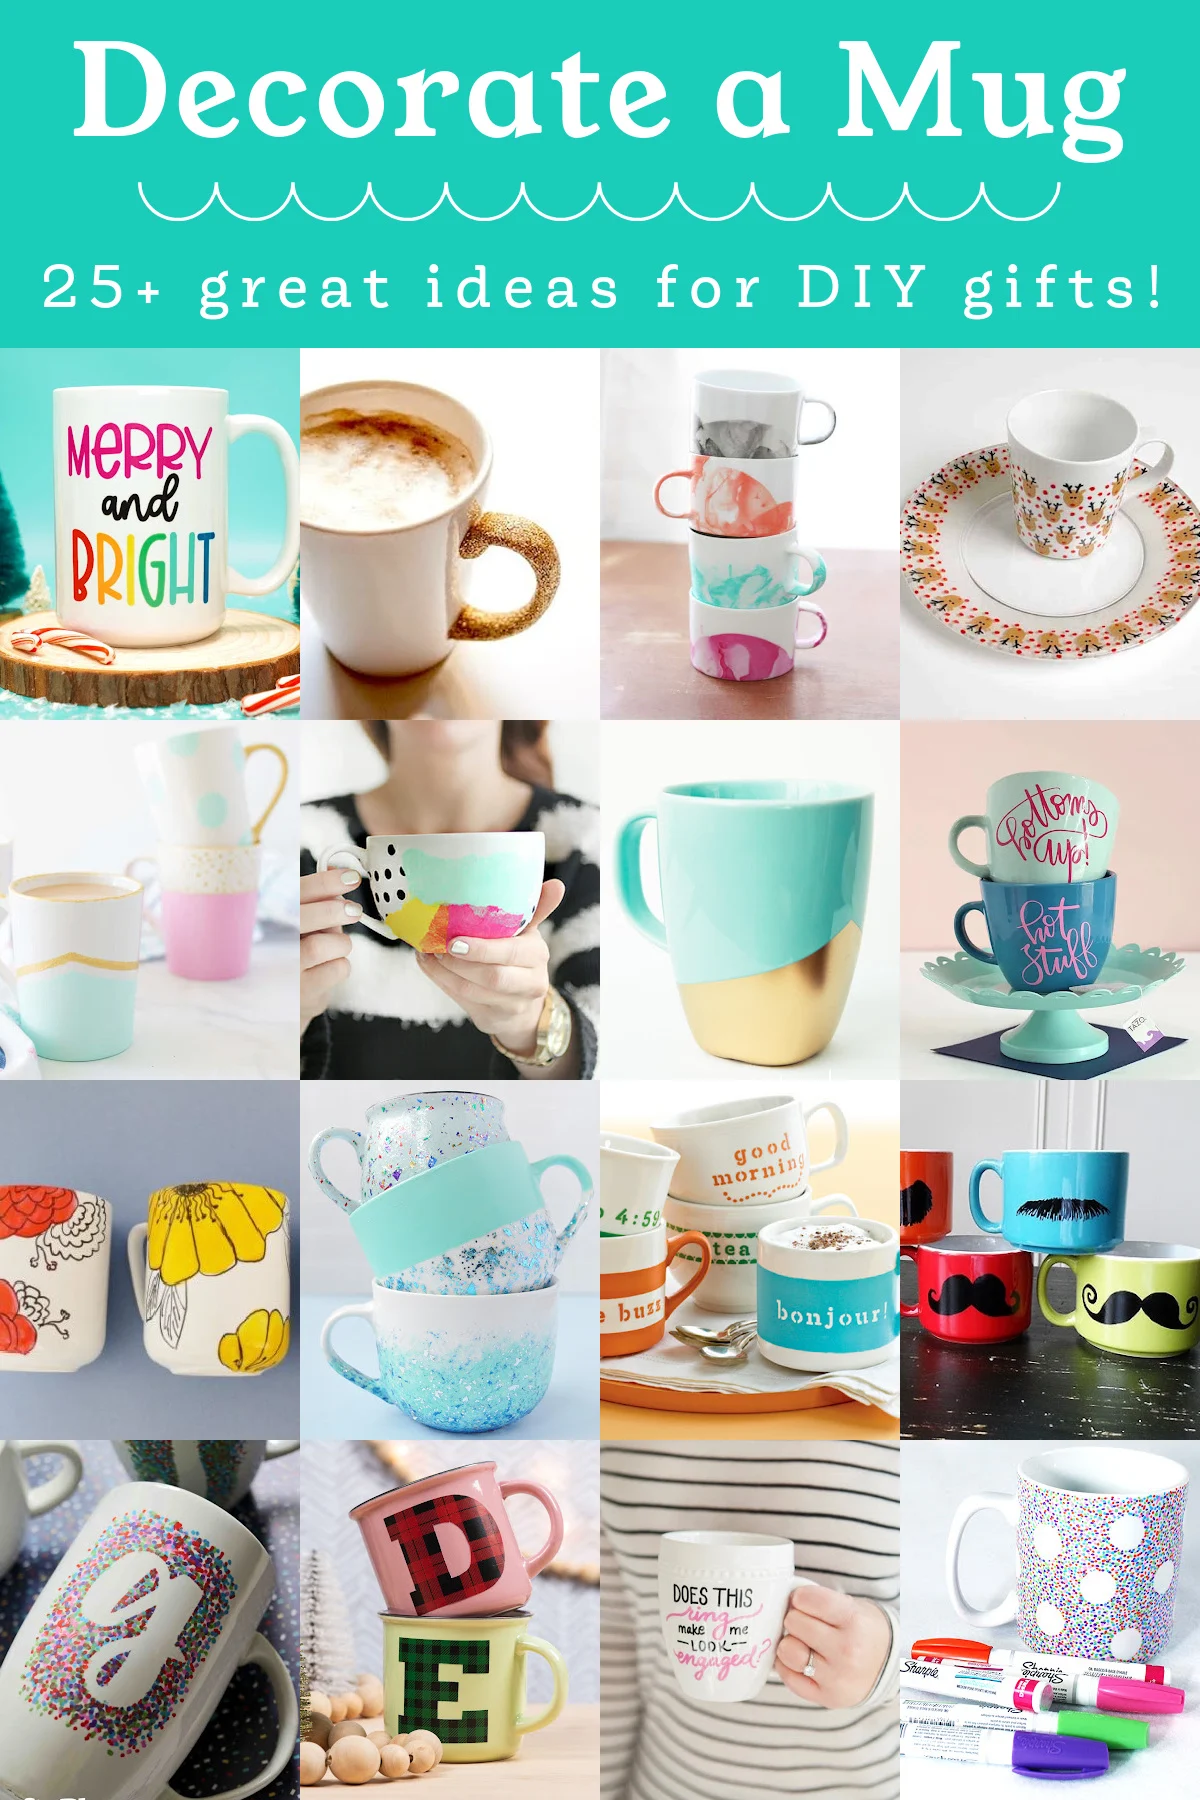 https://diycandy.b-cdn.net/wp-content/uploads/2023/07/Decorate-Mugs-with-These-Fun-and-Easy-Ideas.jpg.webp